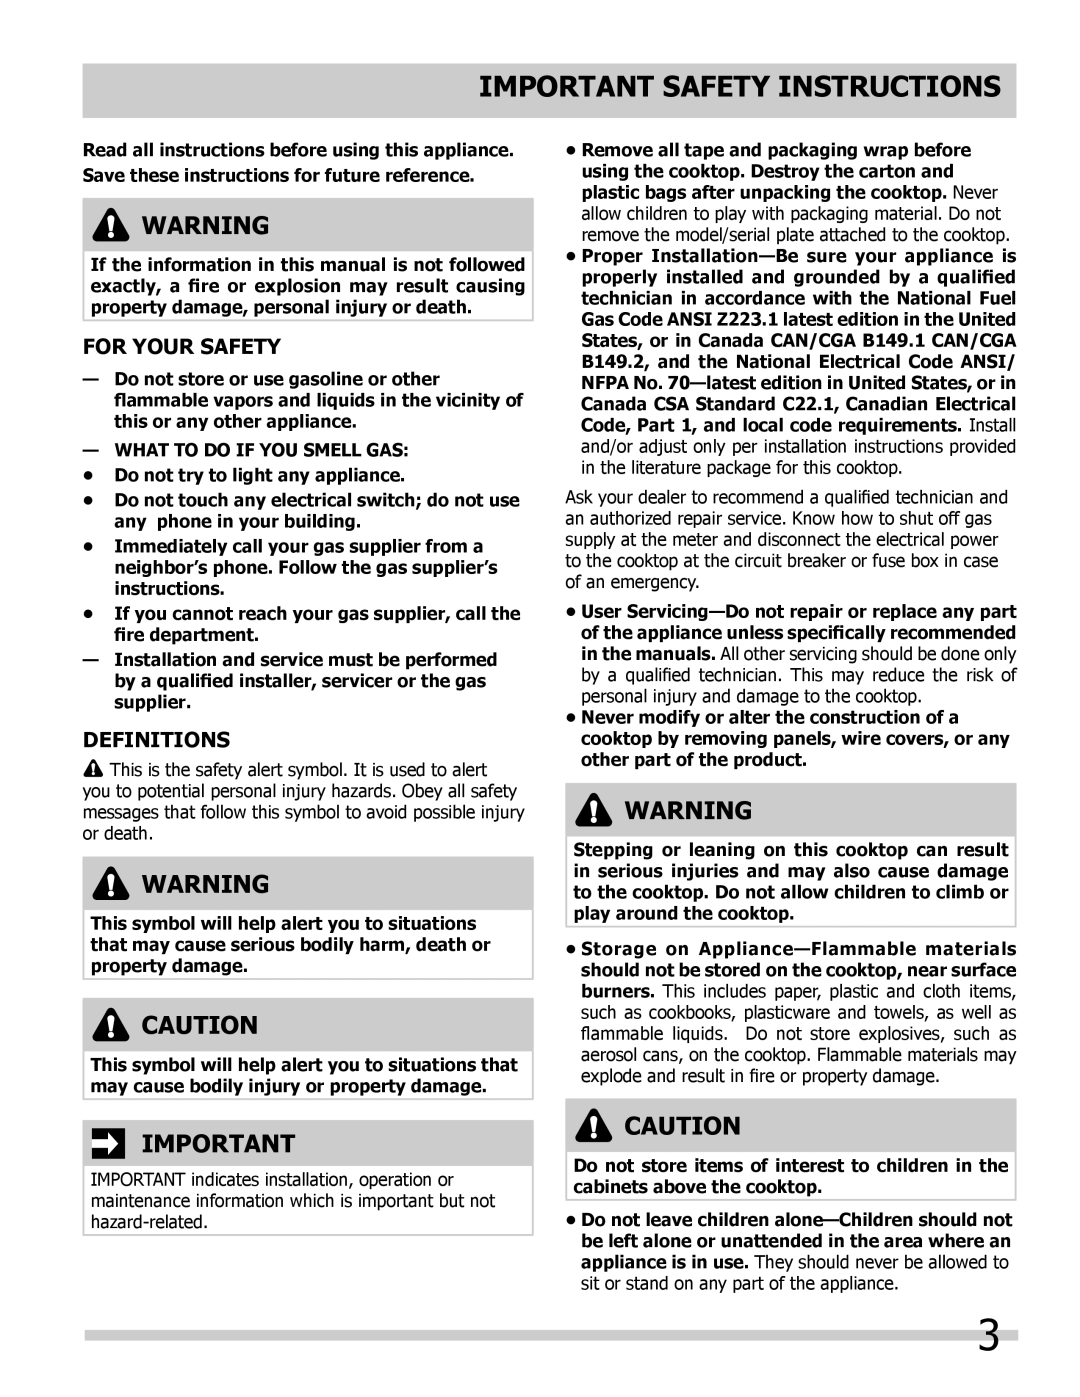 Frigidaire FFGC3625LW, FFGC3613LS, FFGC3625LS, FFGC3015LB Important Safety Instructions, For Your Safety, Definitions 